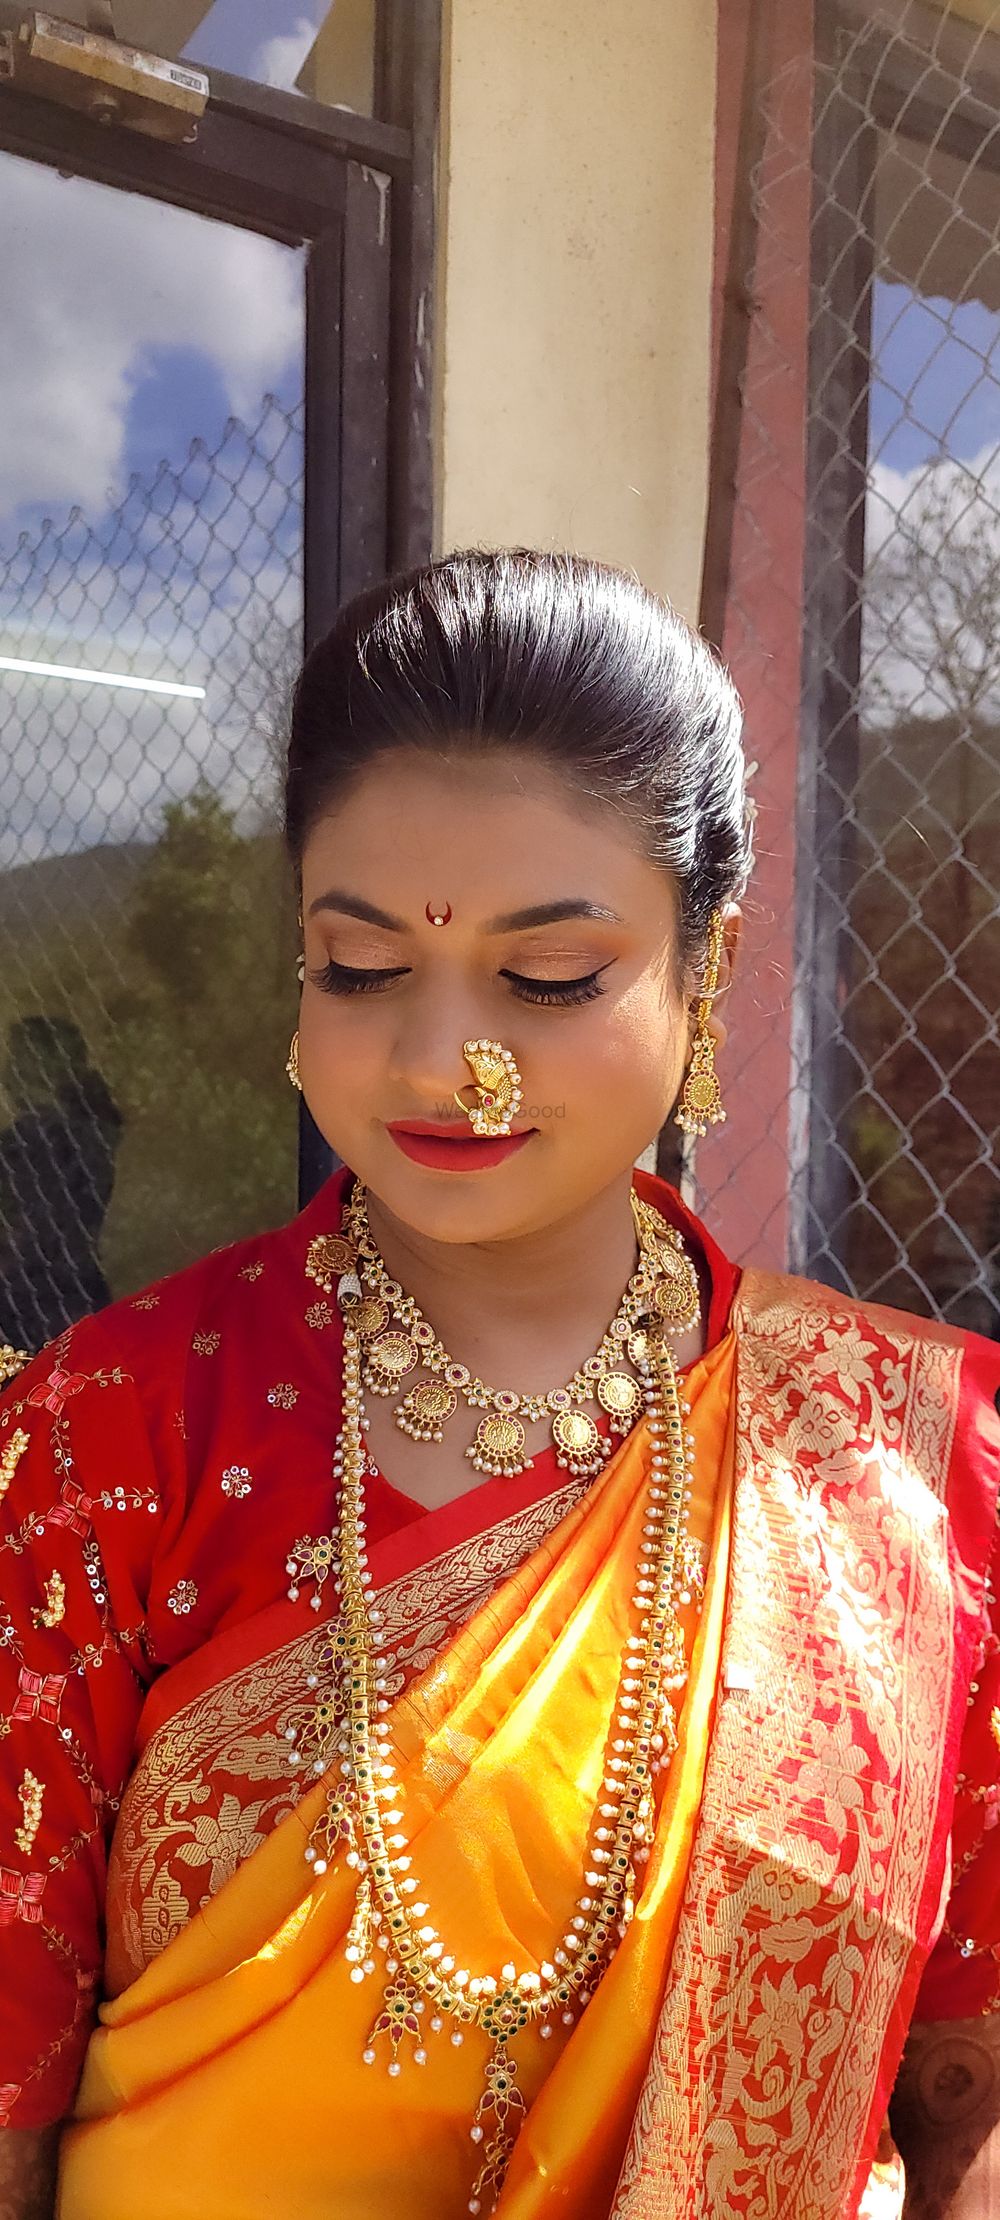 Photo From Vidhilook - By Vadhumakeup by Prachi